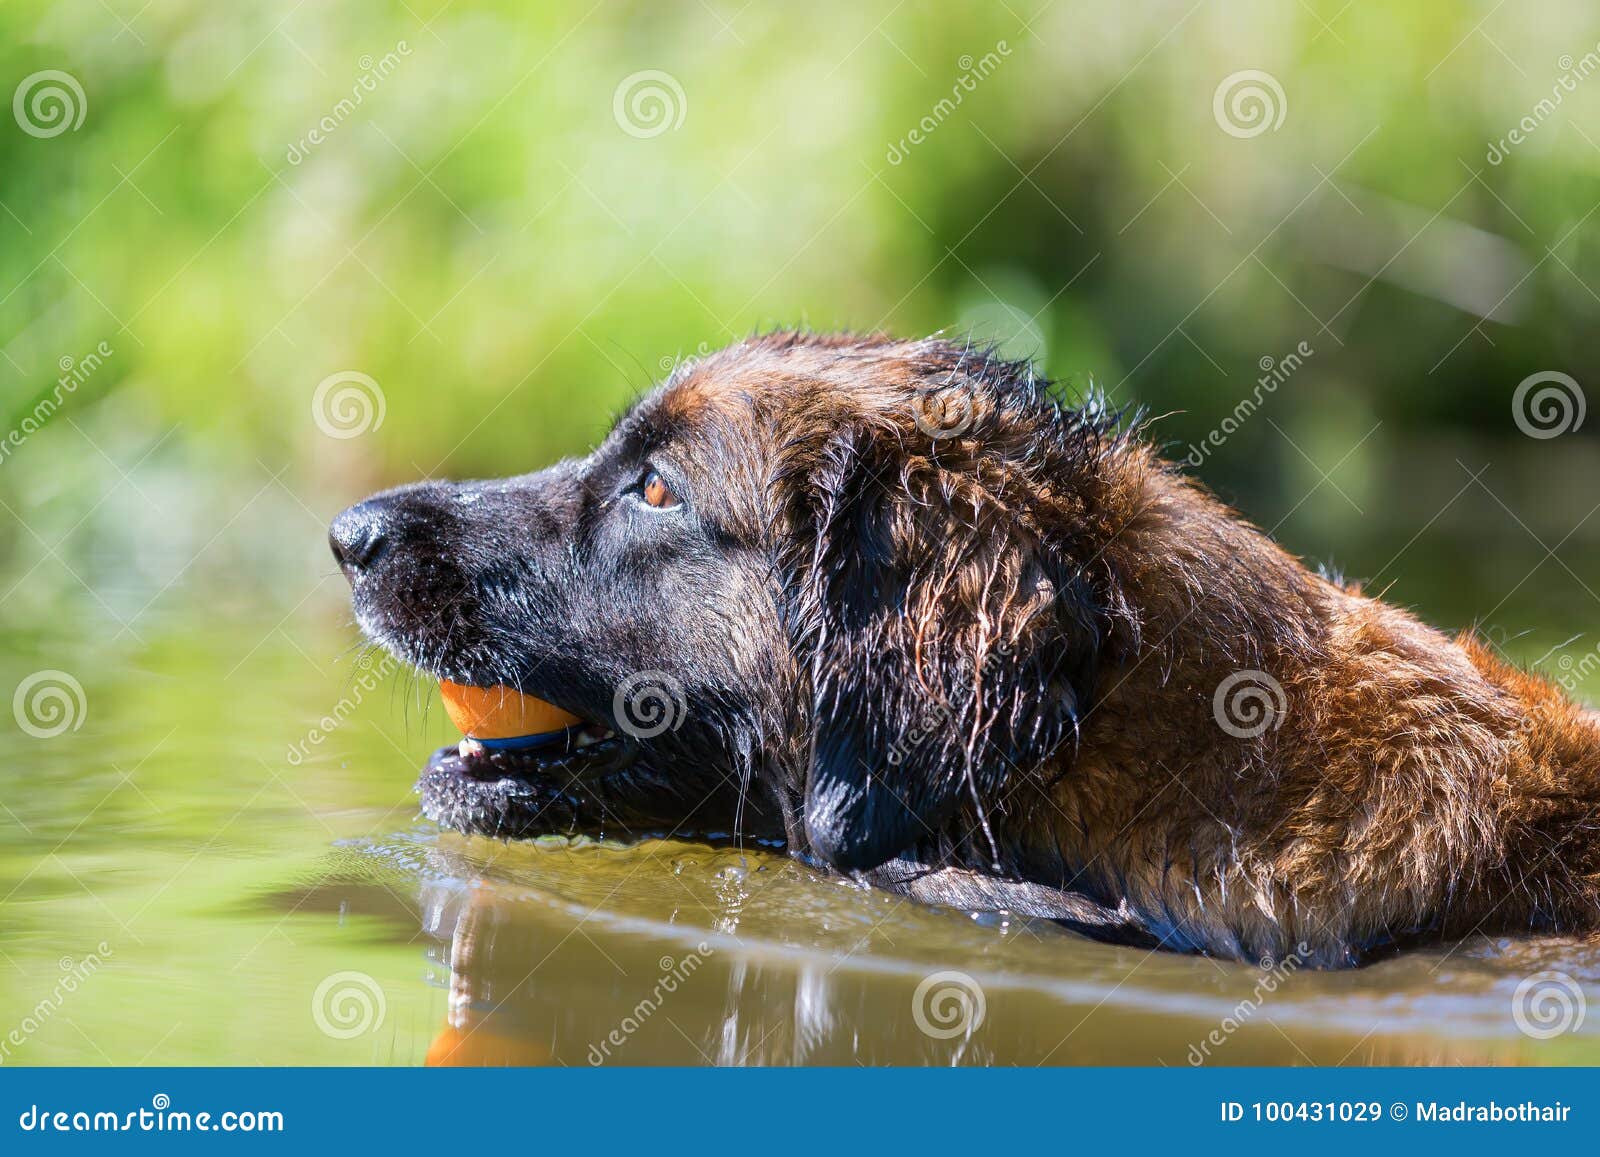 leonberger swims in a lake